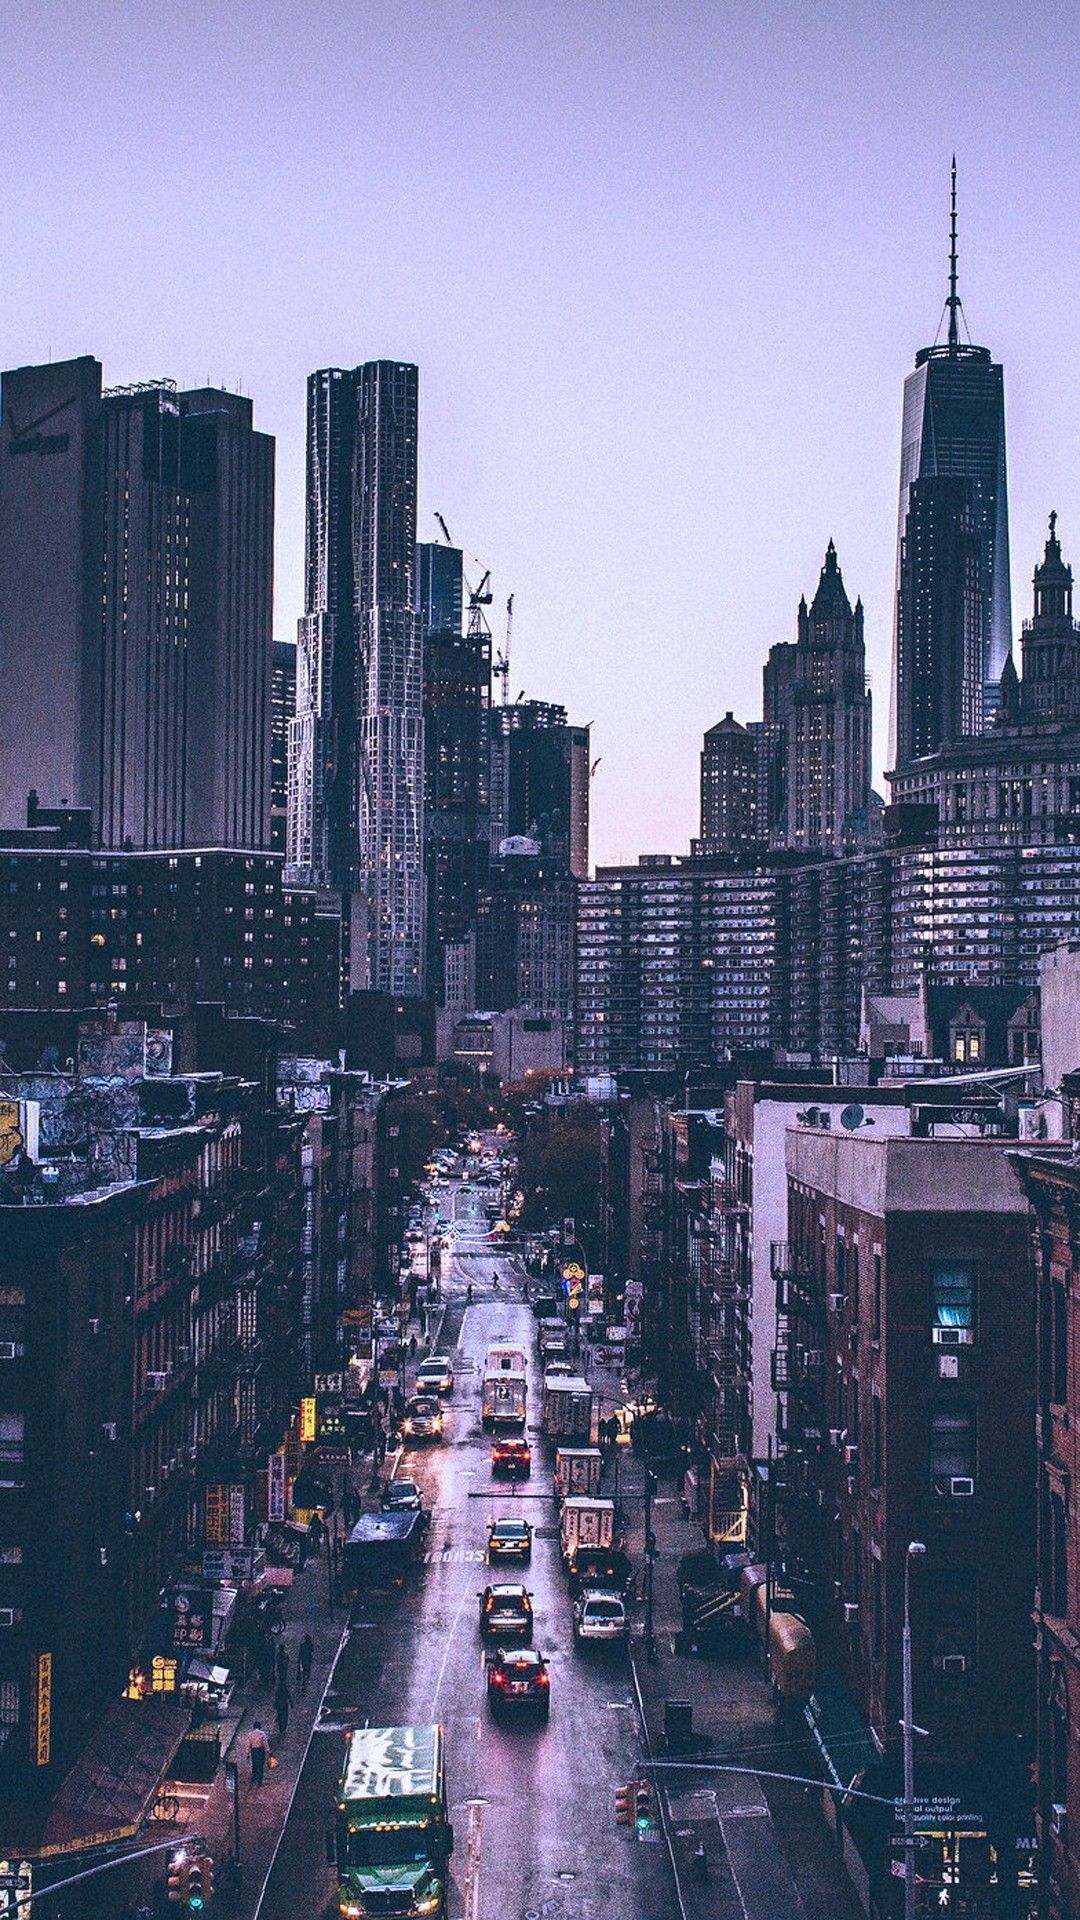 City Aesthetic Wallpapers